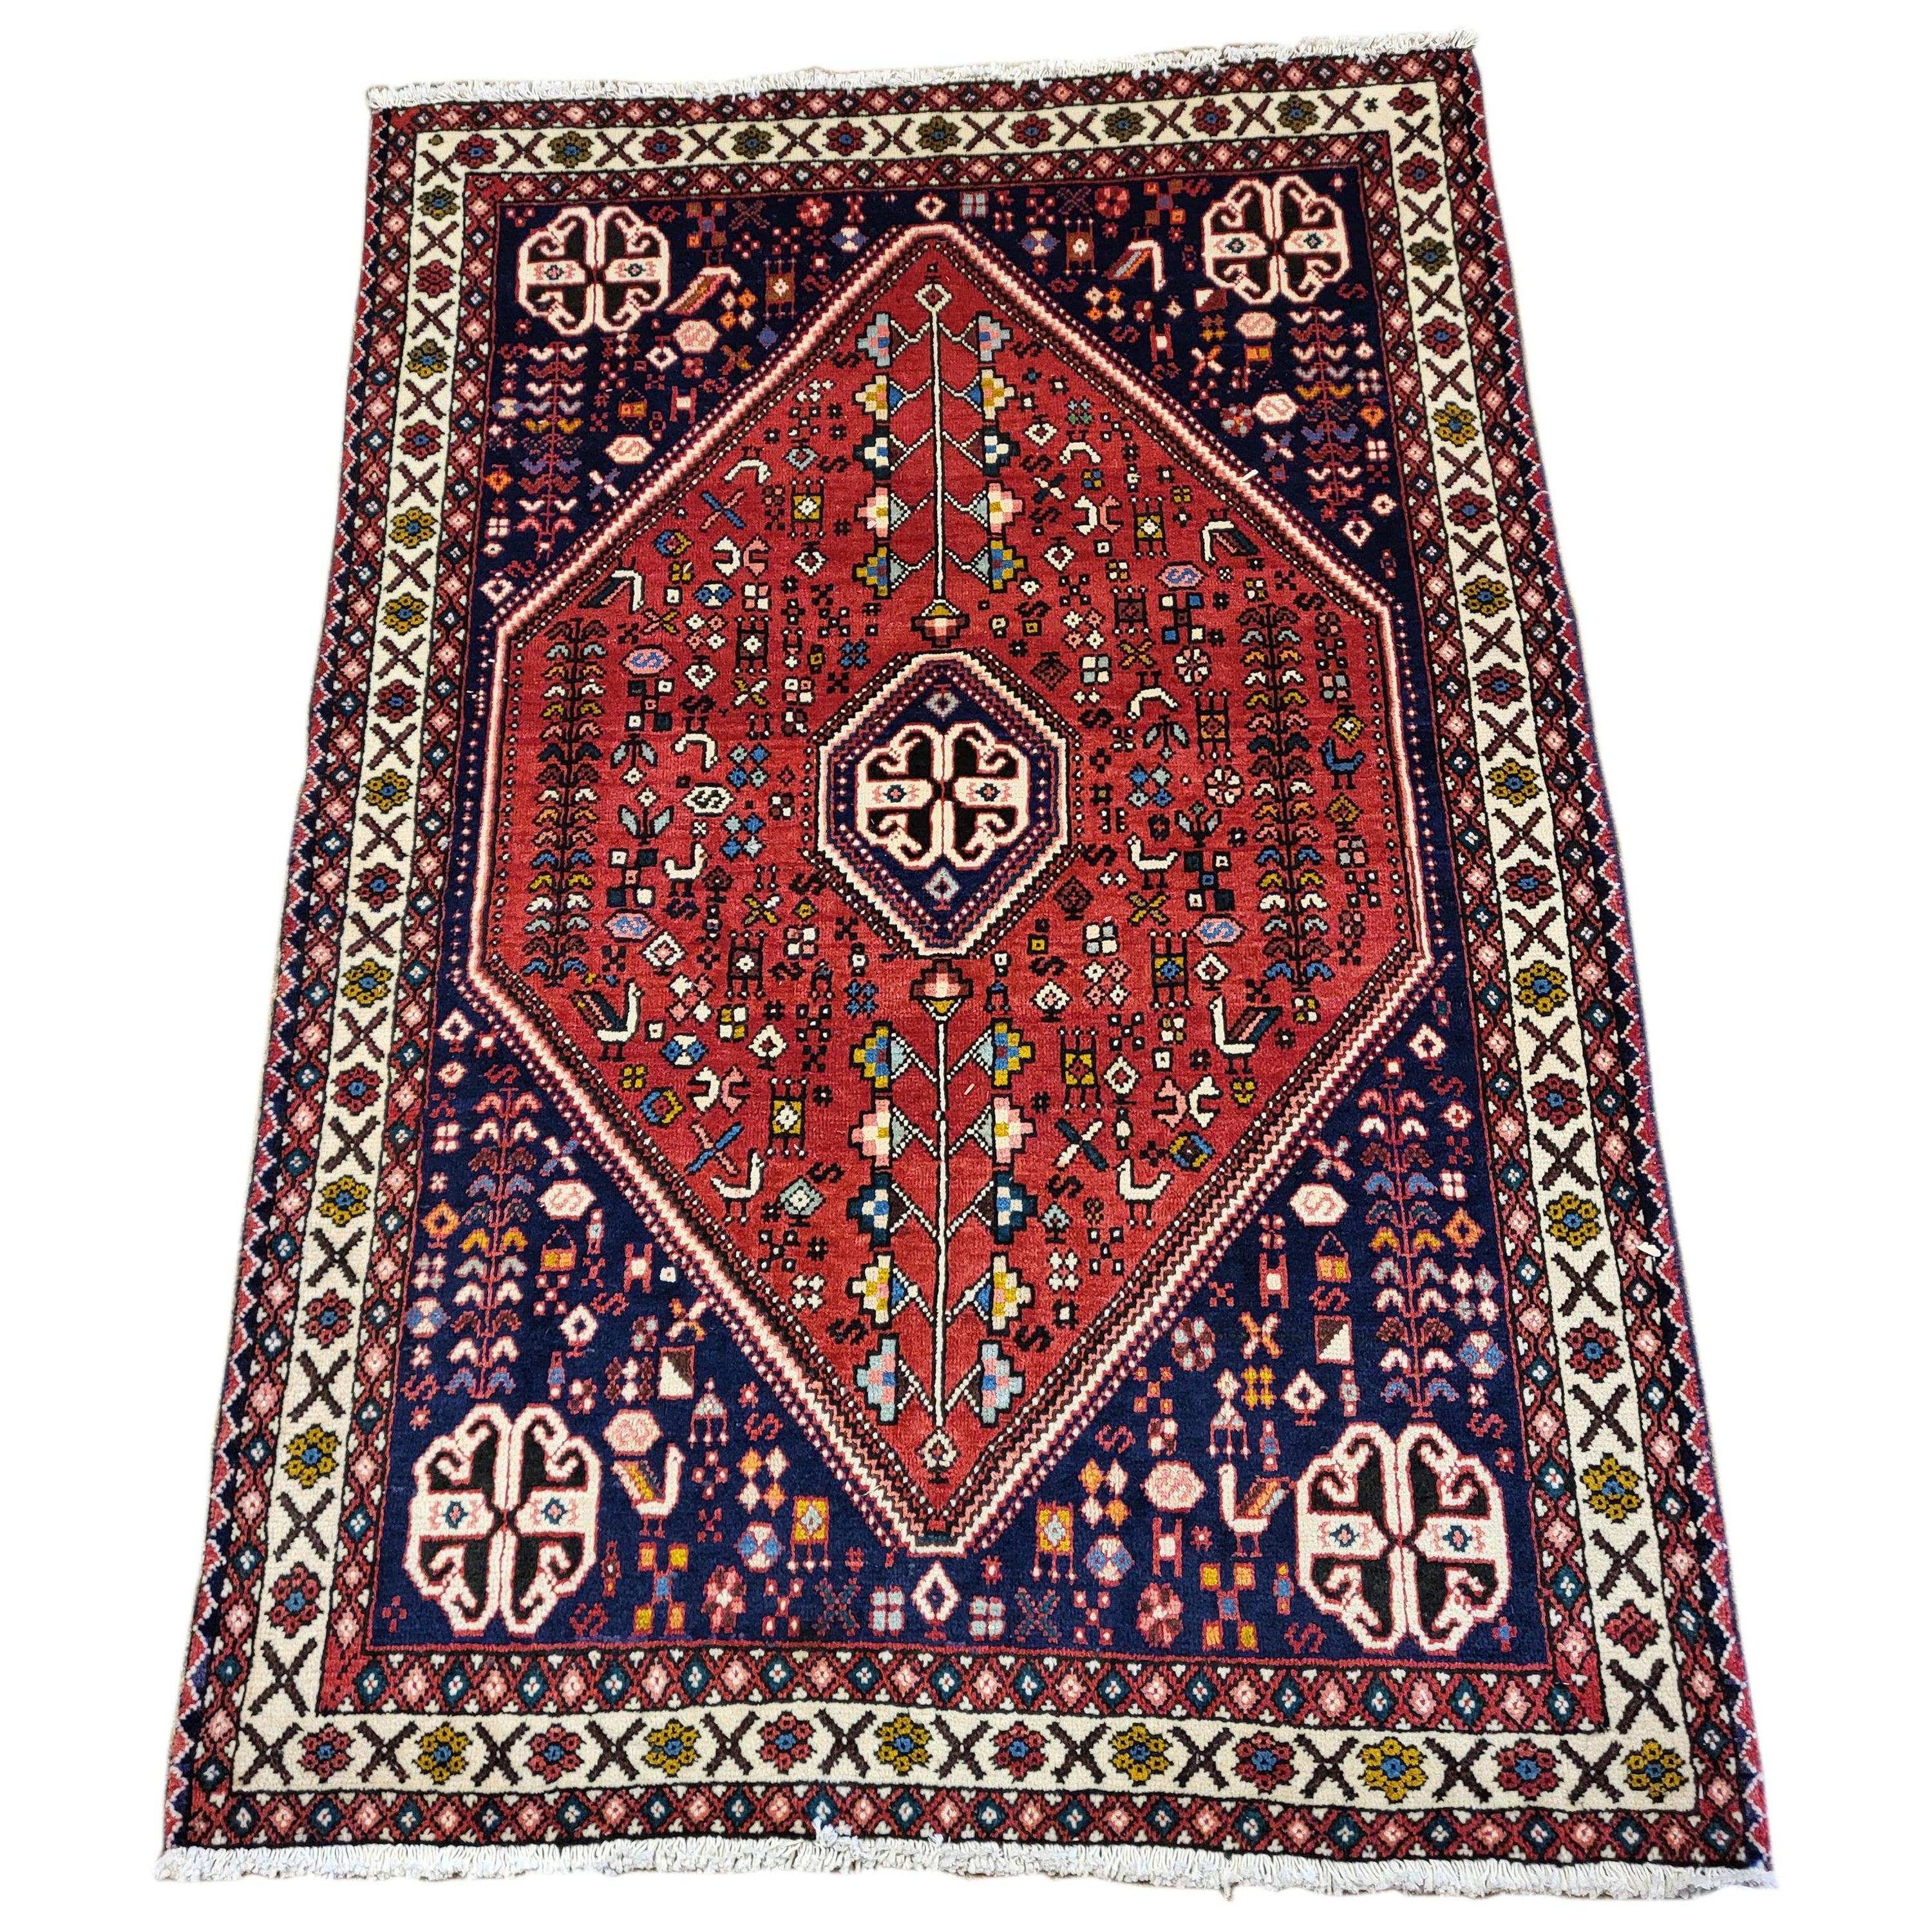 3'x5' Antique Abadeh- Persian Tribal Rug- red/blue